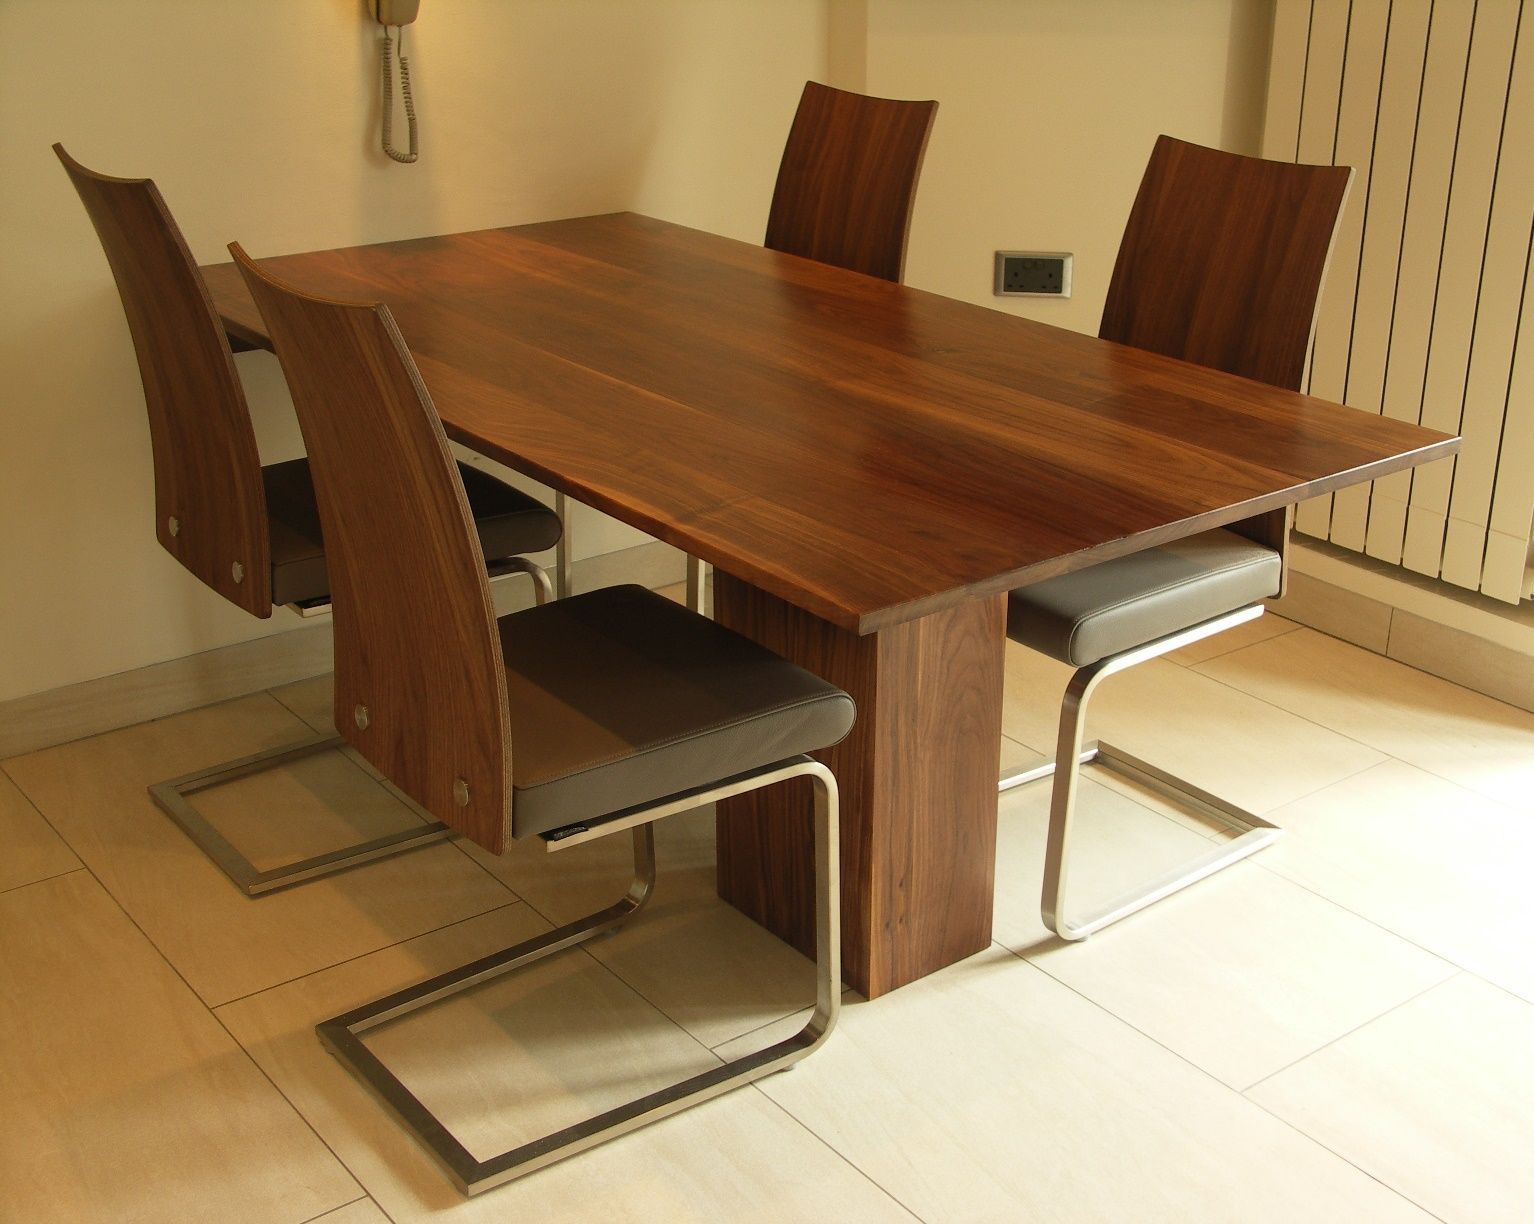 American Black Walnut Dining Table With Matching Pertaining To 2017 Black And Walnut Dining Tables (View 11 of 15)